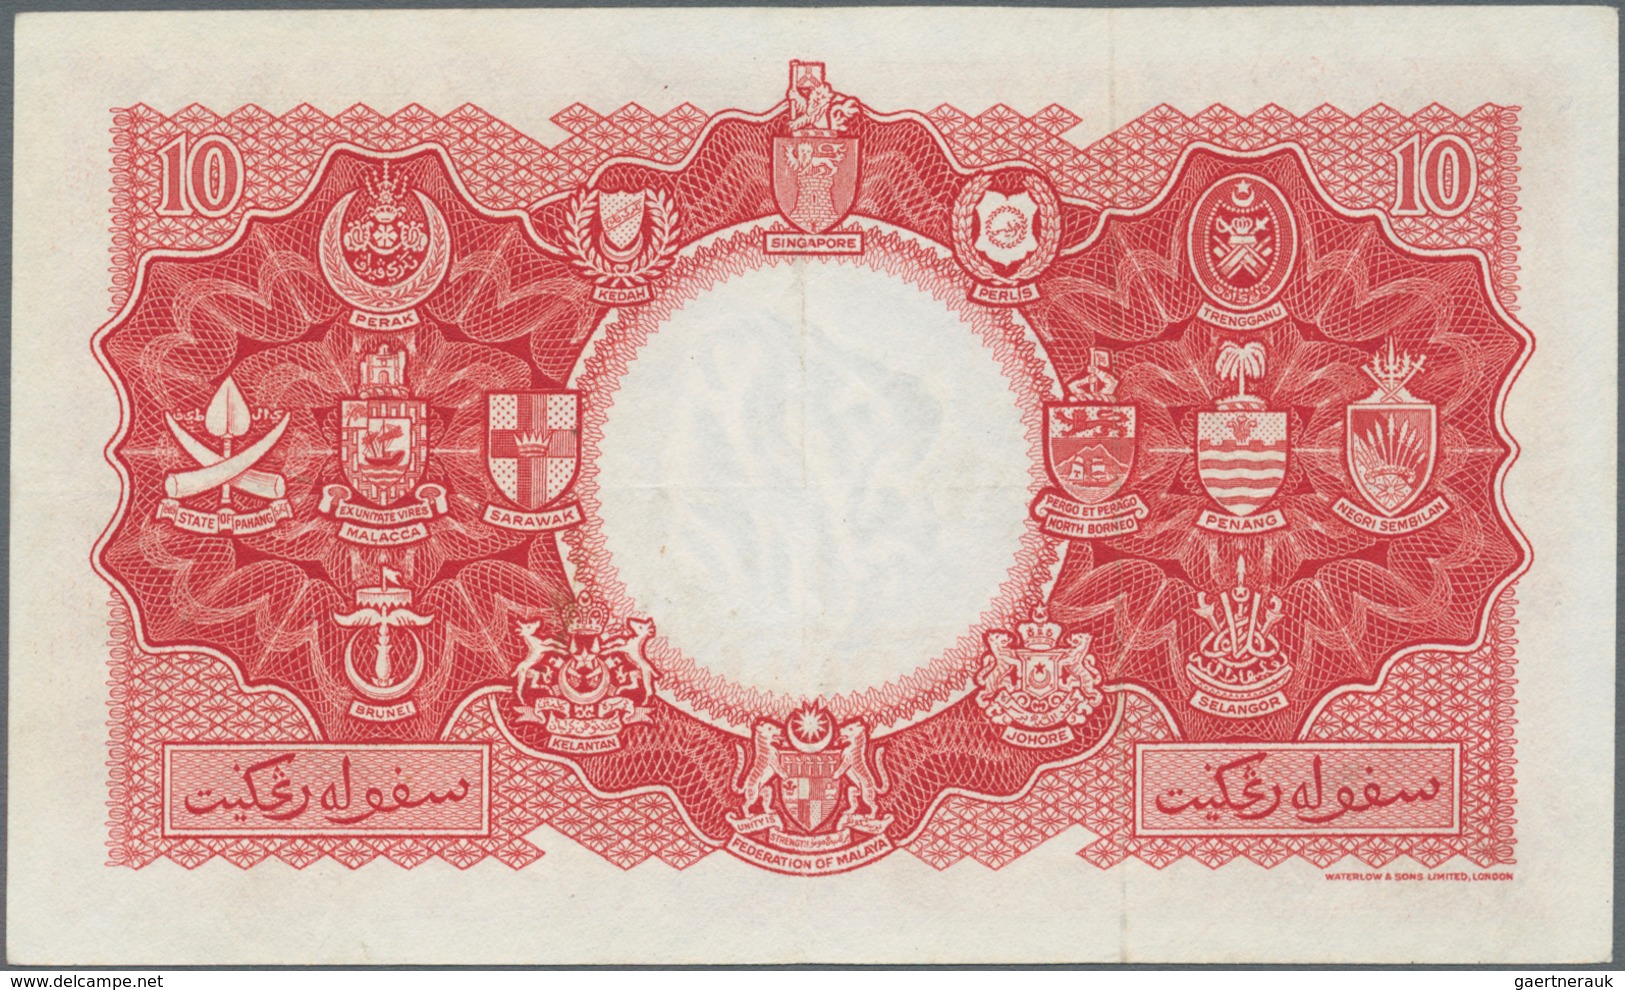 Malaya & British Borneo: Pair With 1 And 10 Dollars 1953, P.1, 3, Both In VF/VF+ Condition. (2 Pcs.) - Maleisië